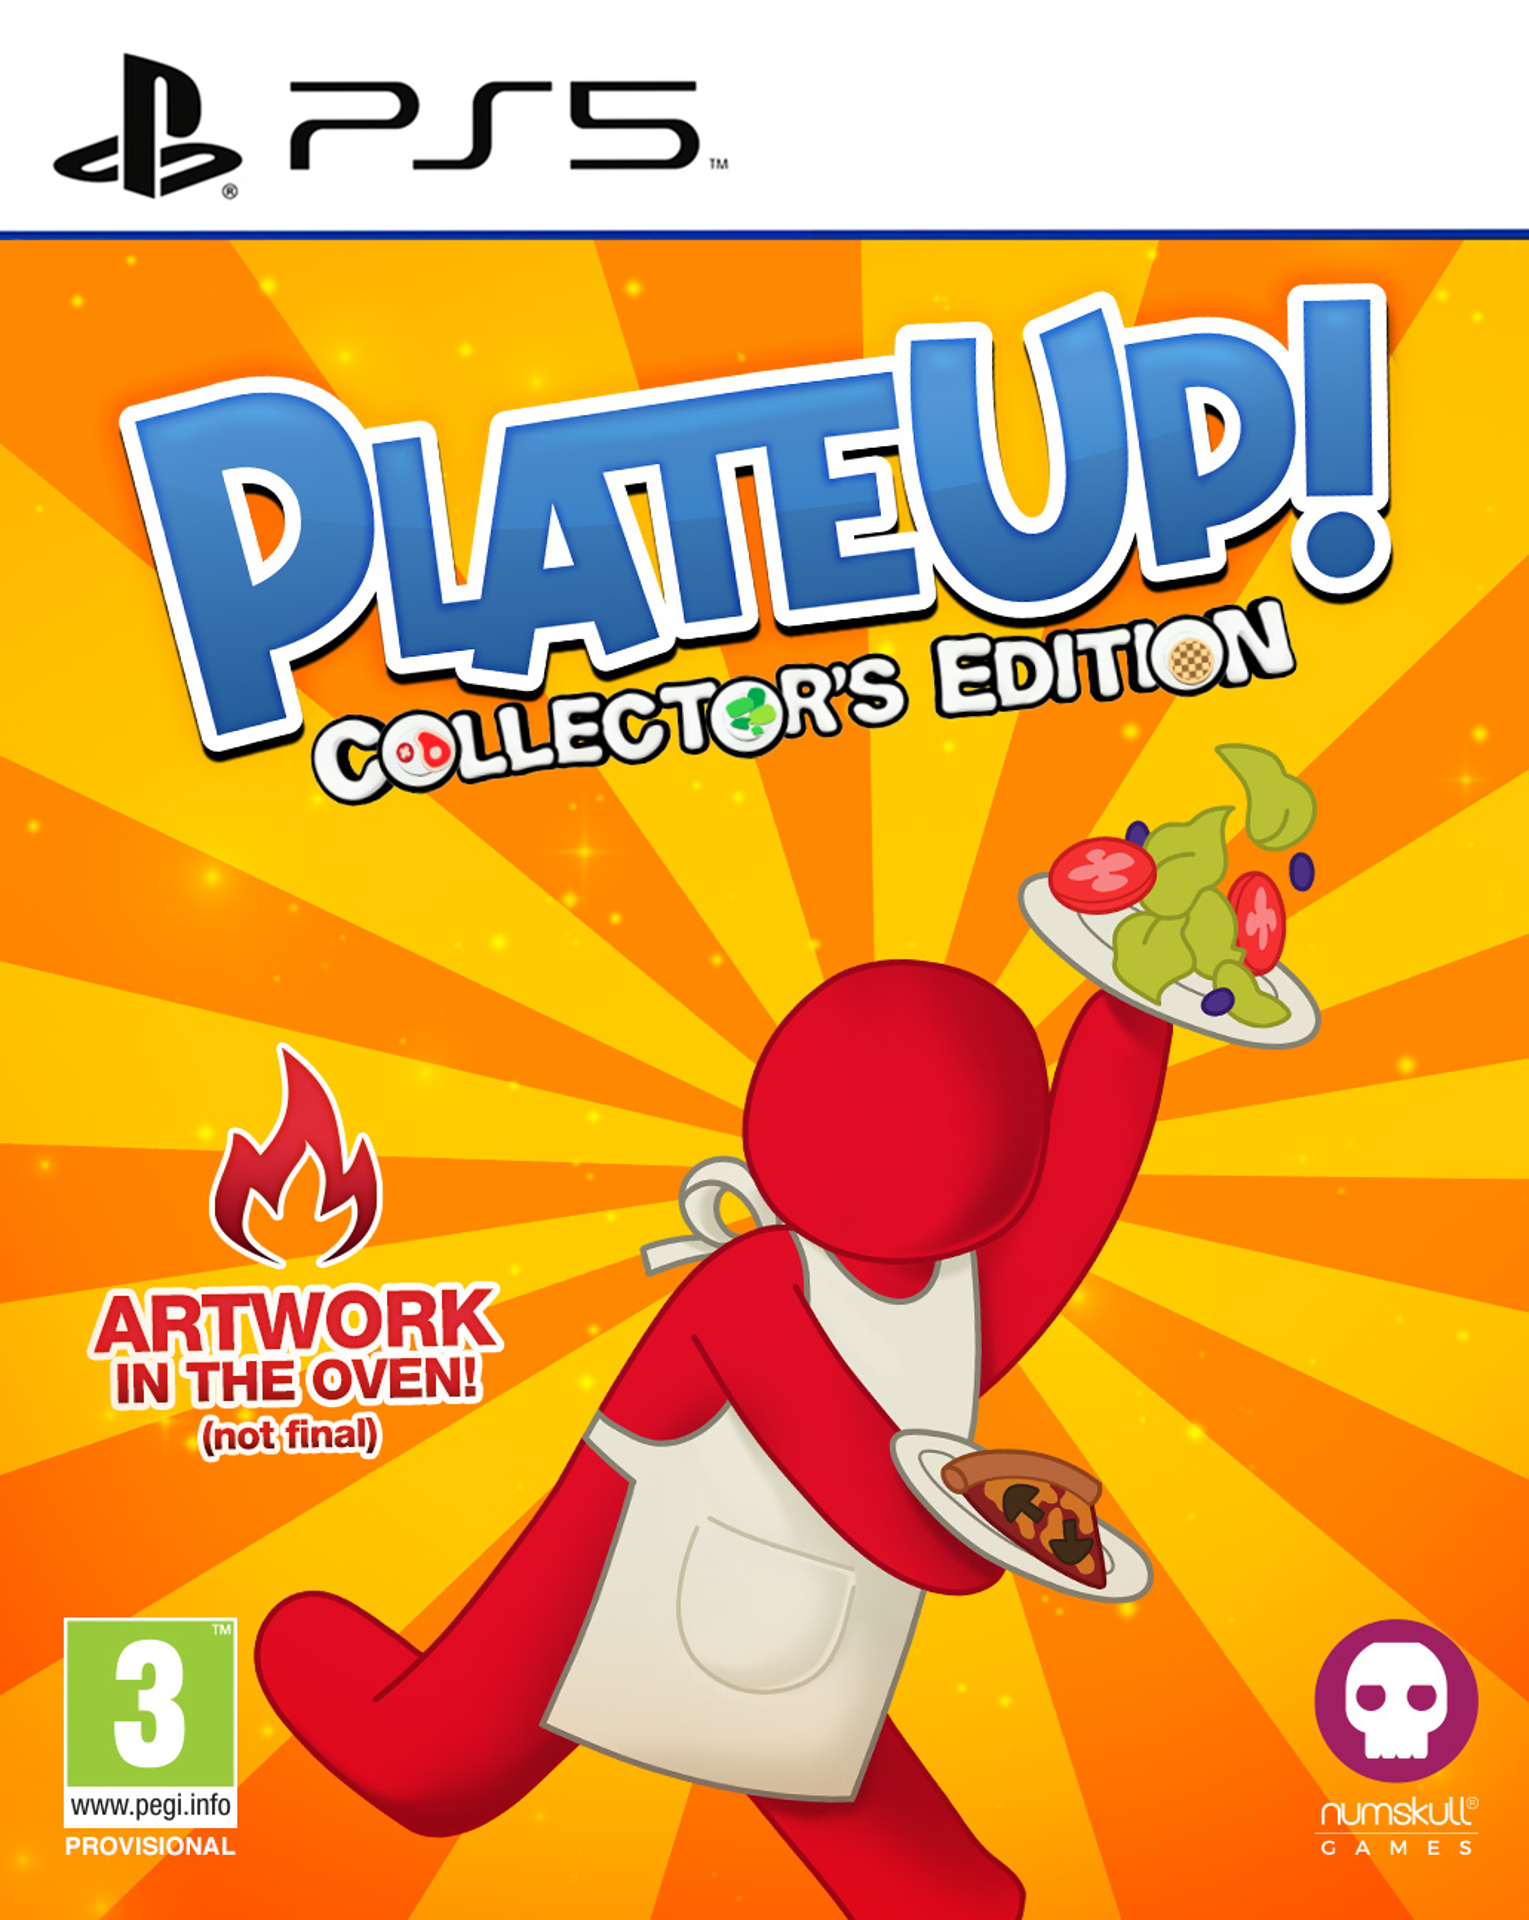 PlateUp! - Collector's Edition